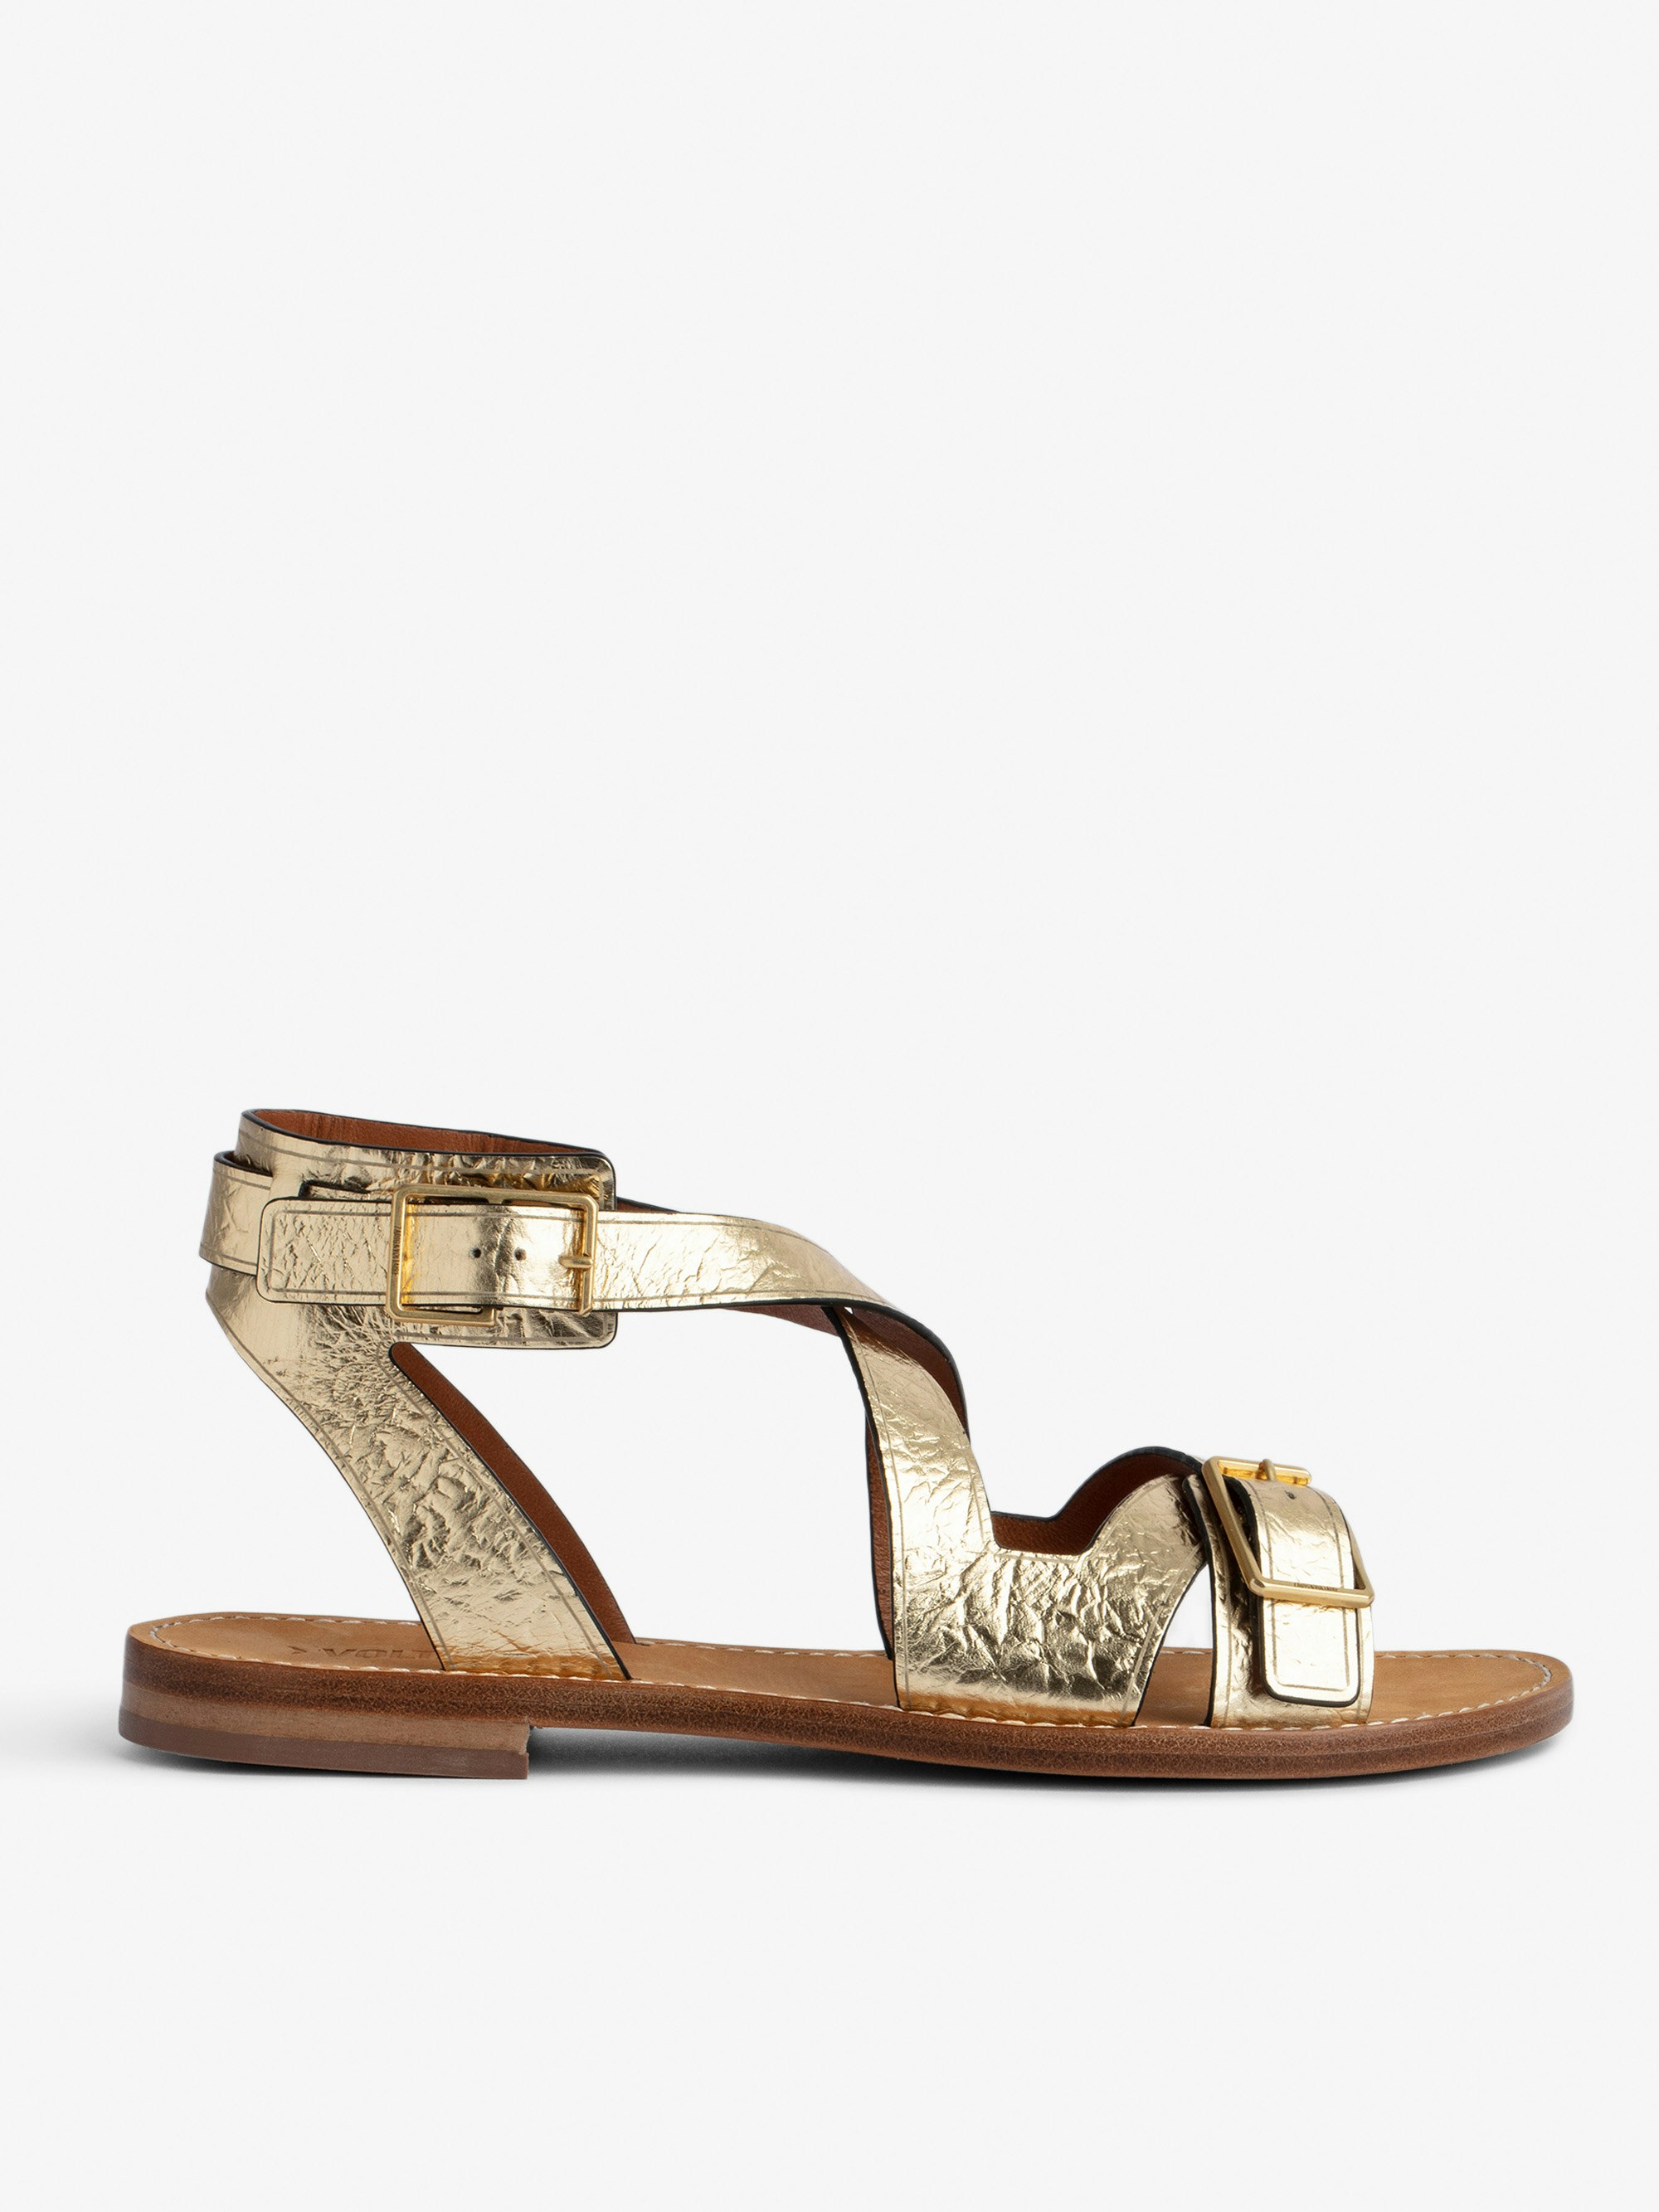 Cecilia Caprese Sandals - Women's sandals in metallic, crinkled leather with straps and C-shaped buckles